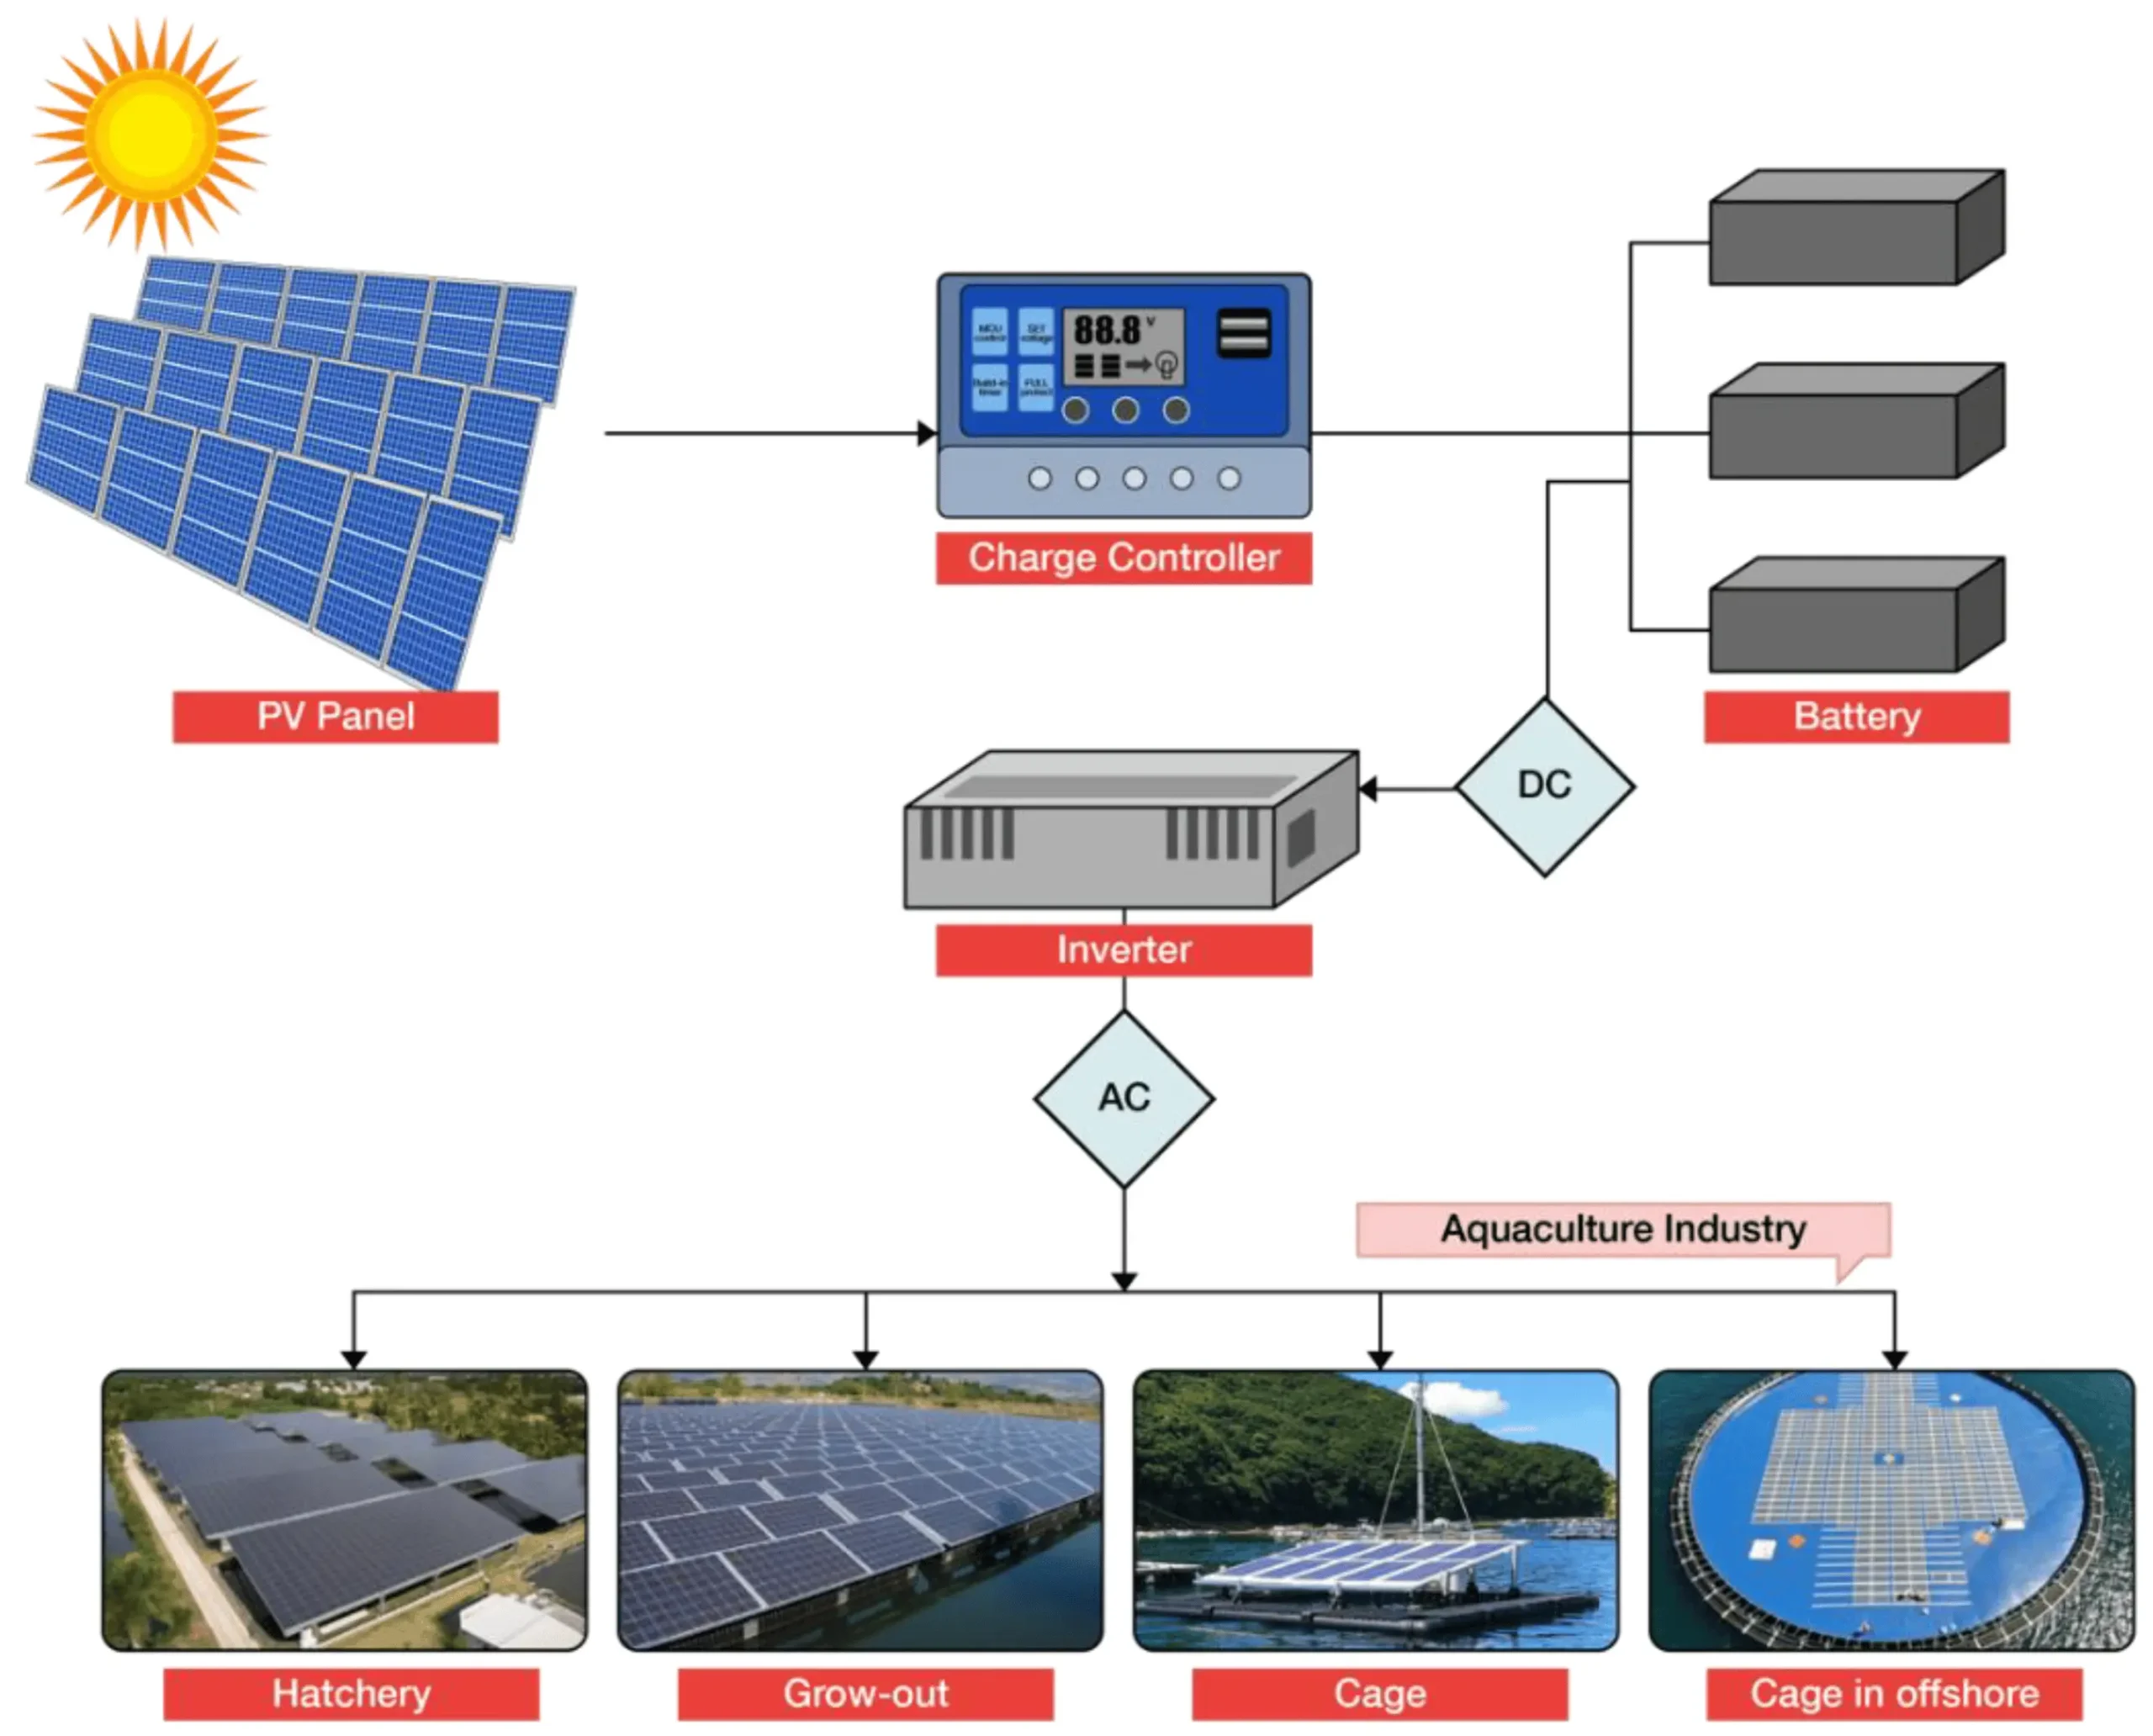 solar energy advancements in agriculture and food production systems - Can solar energy be used in preserving food